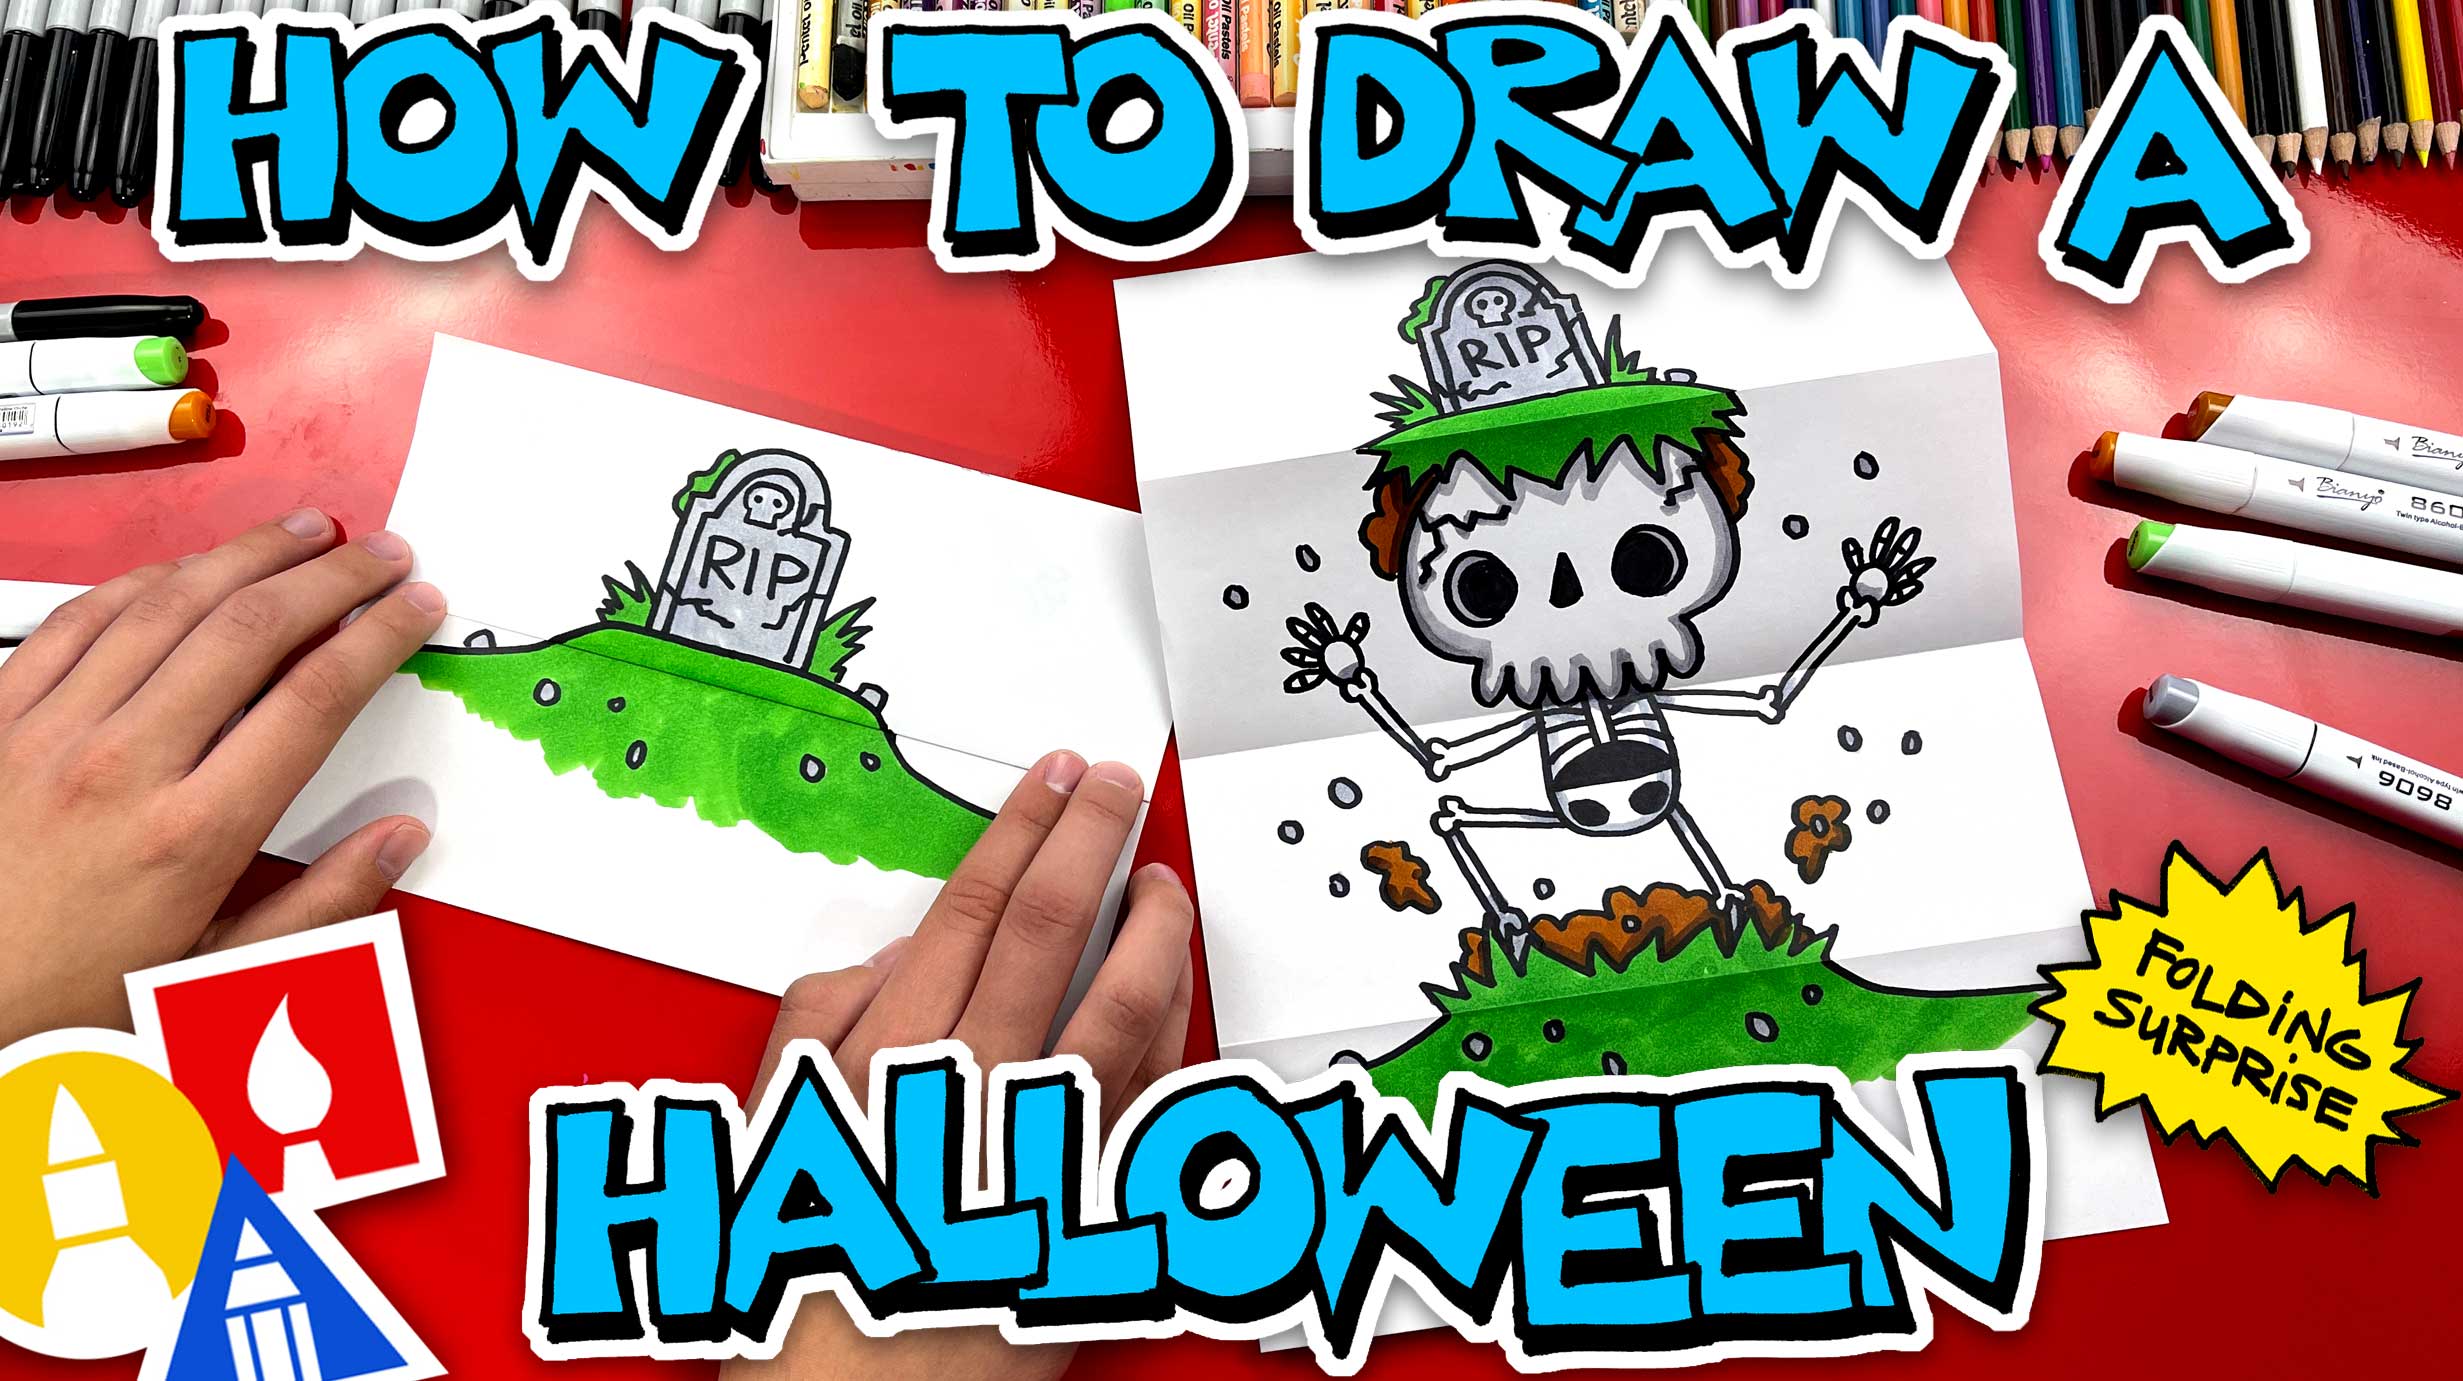 How To Draw A Halloween Folding Surprise (Skeleton Grave) Art For